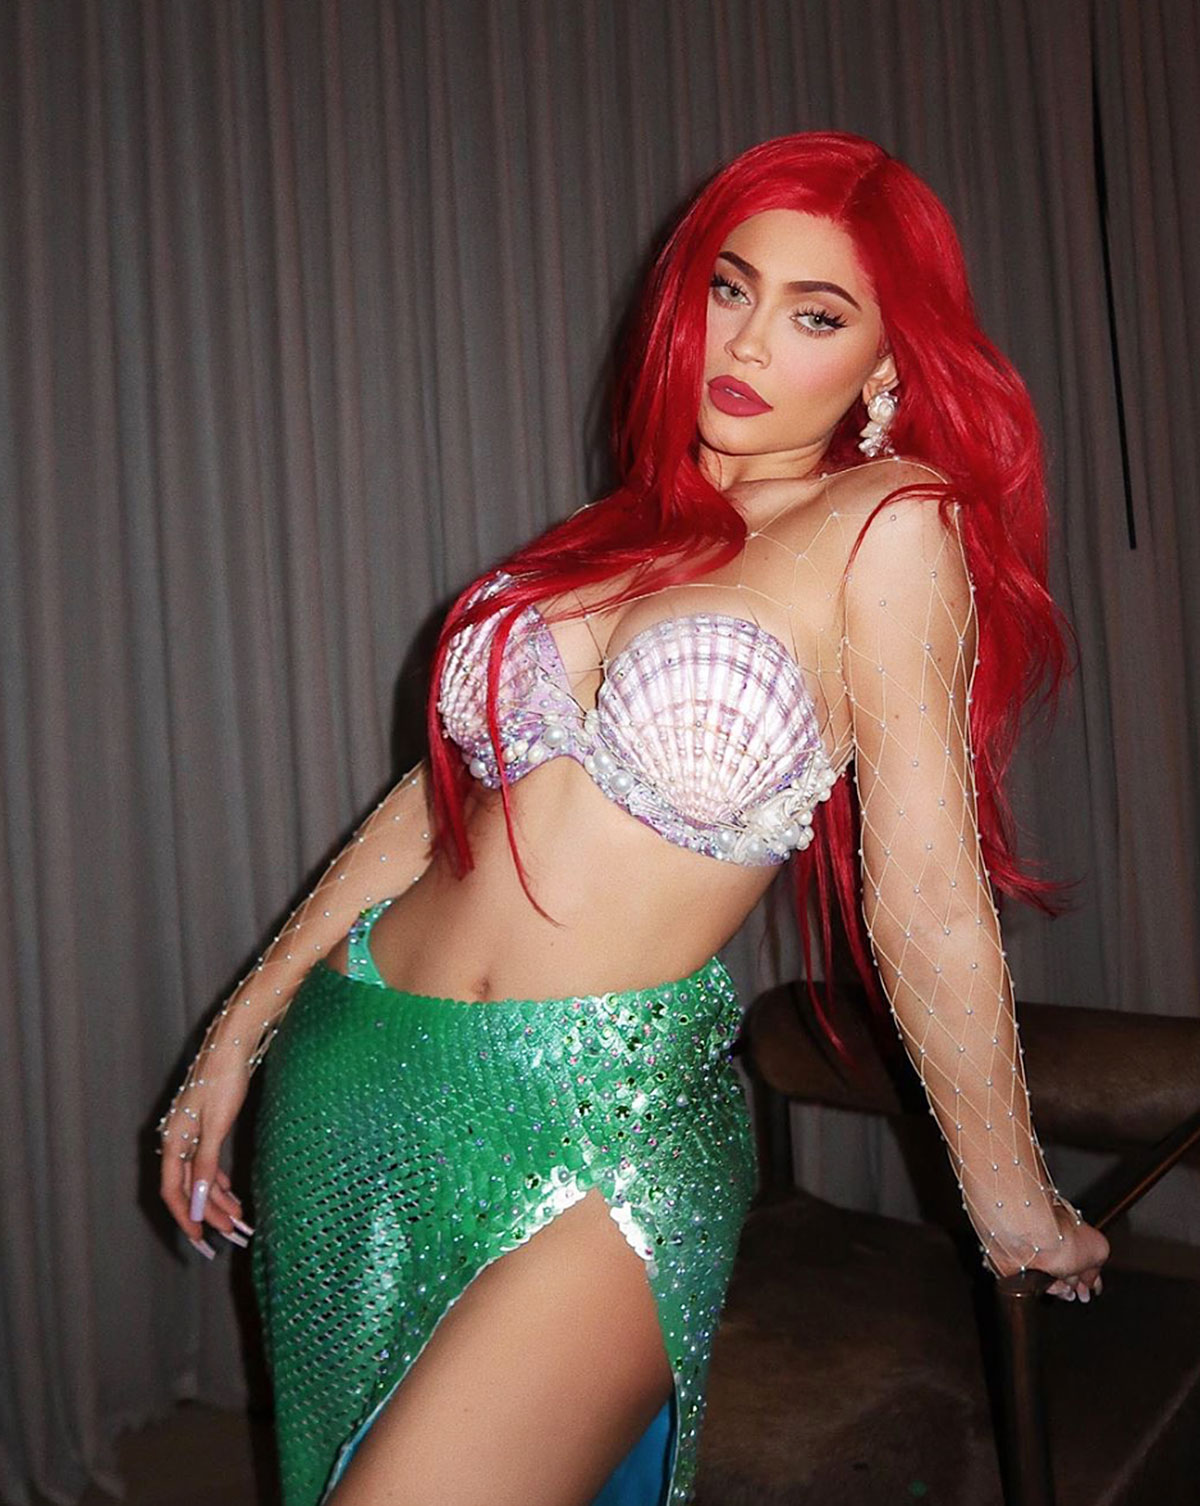 Kylie Jenner's Best Halloween Costumes of All Time: Pics